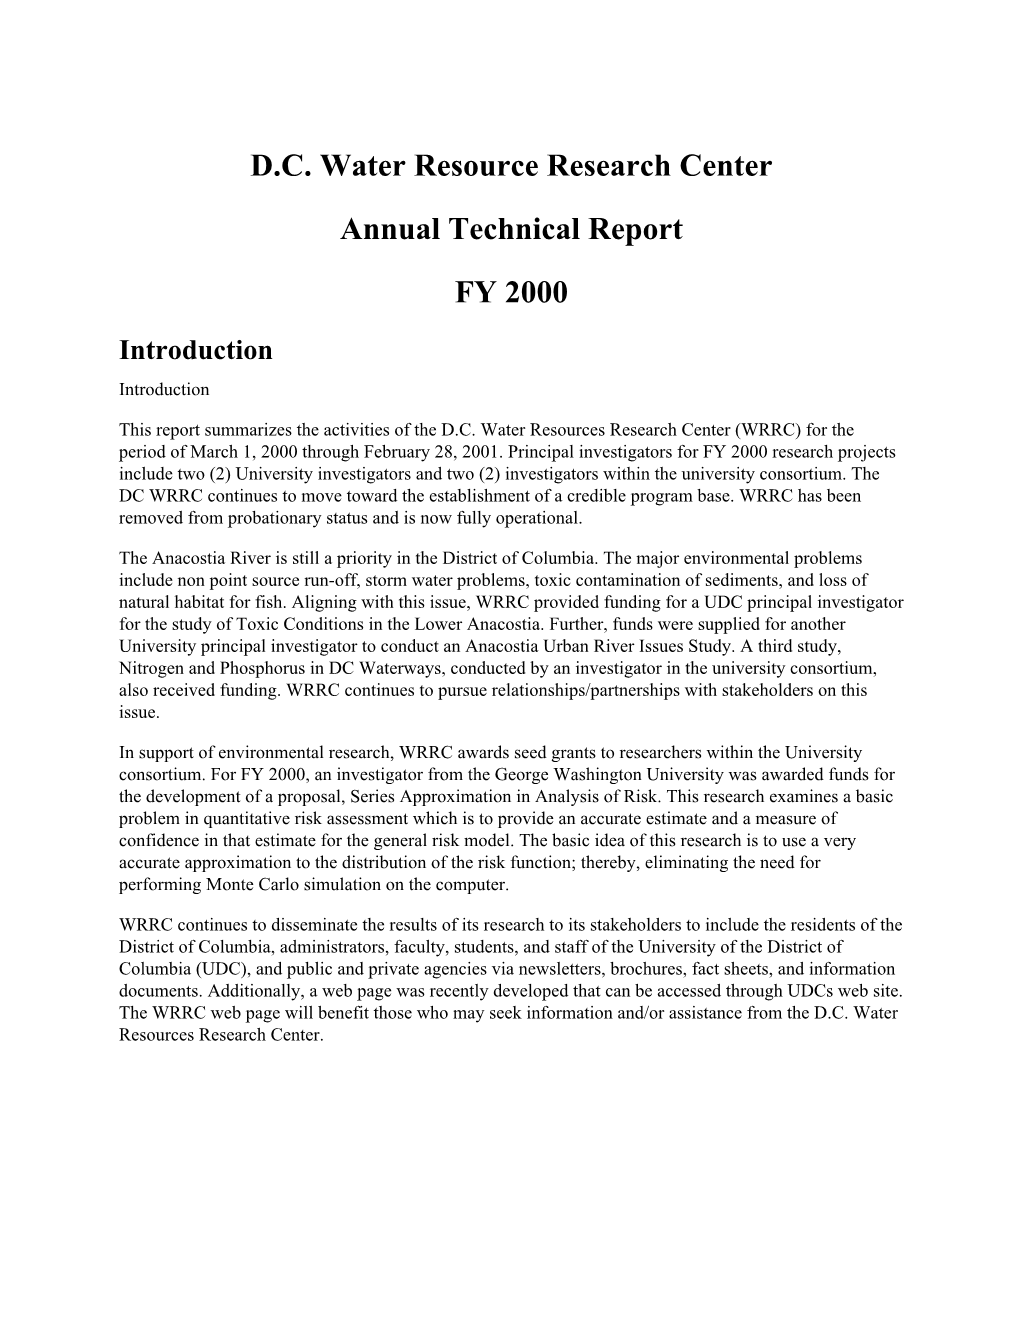 D.C. Water Resource Research Center Annual Technical Report FY 2000 Introduction Introduction